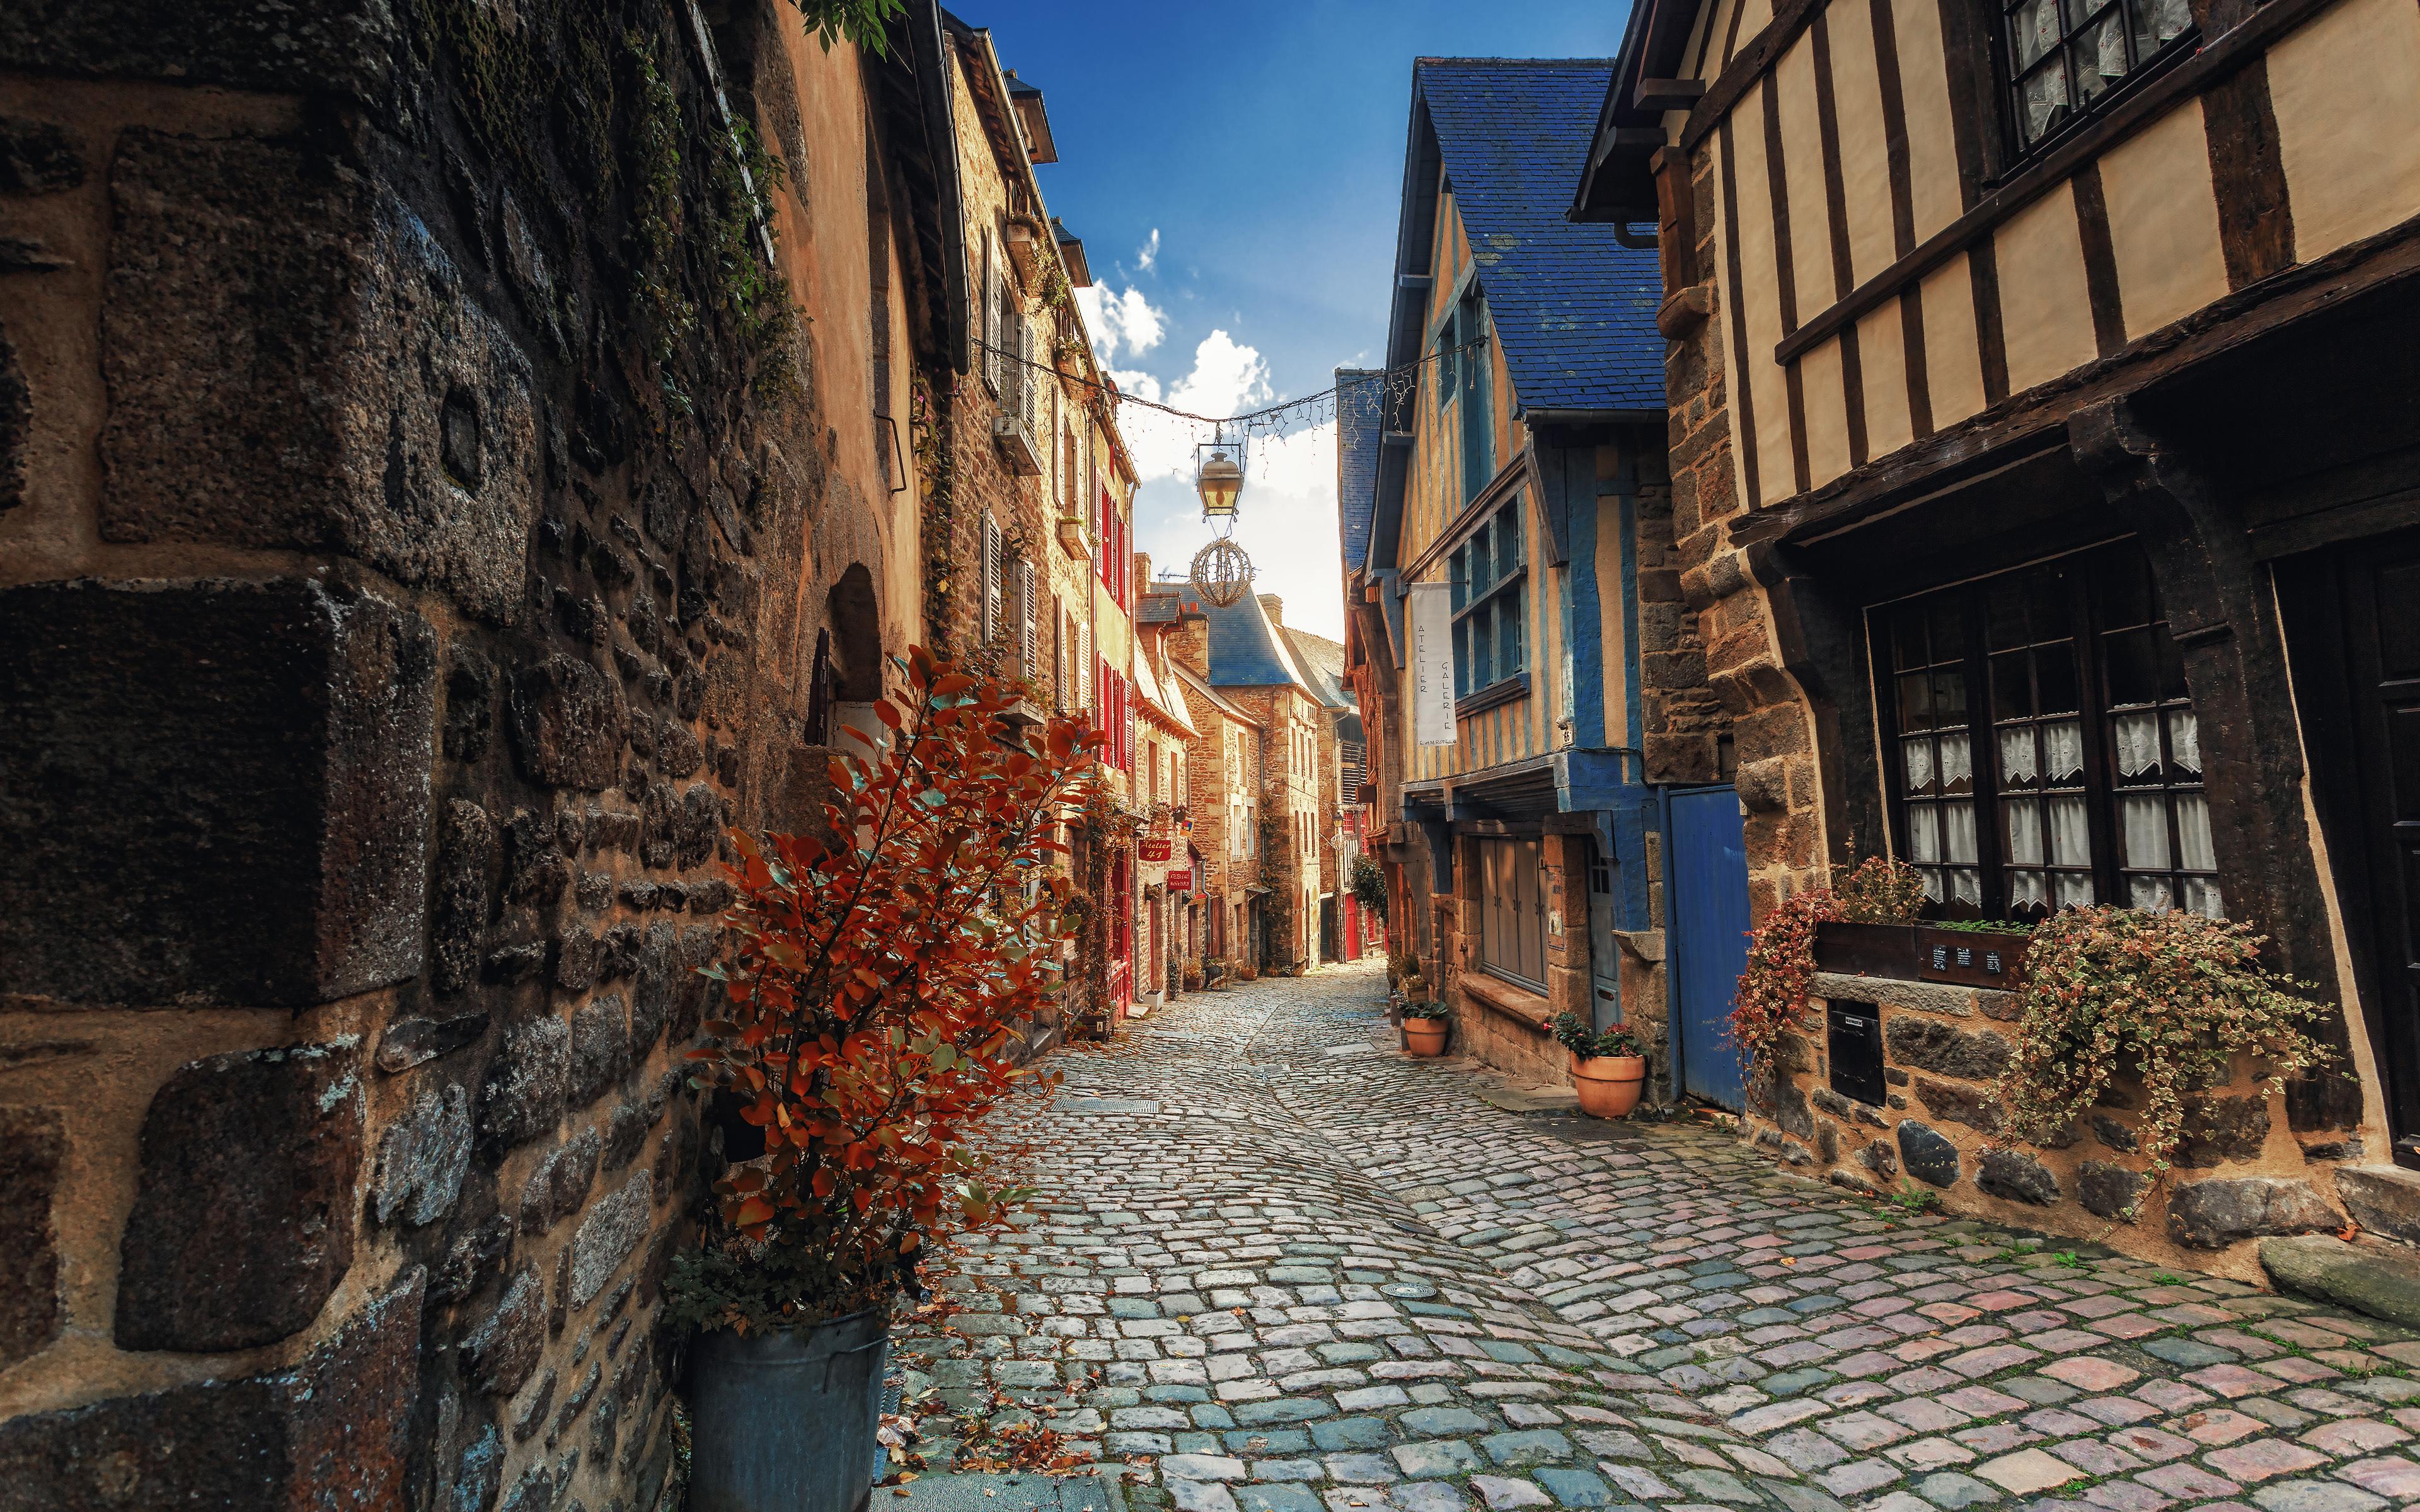 Download wallpaper Dinan, old street, houses, pavement, Brittany